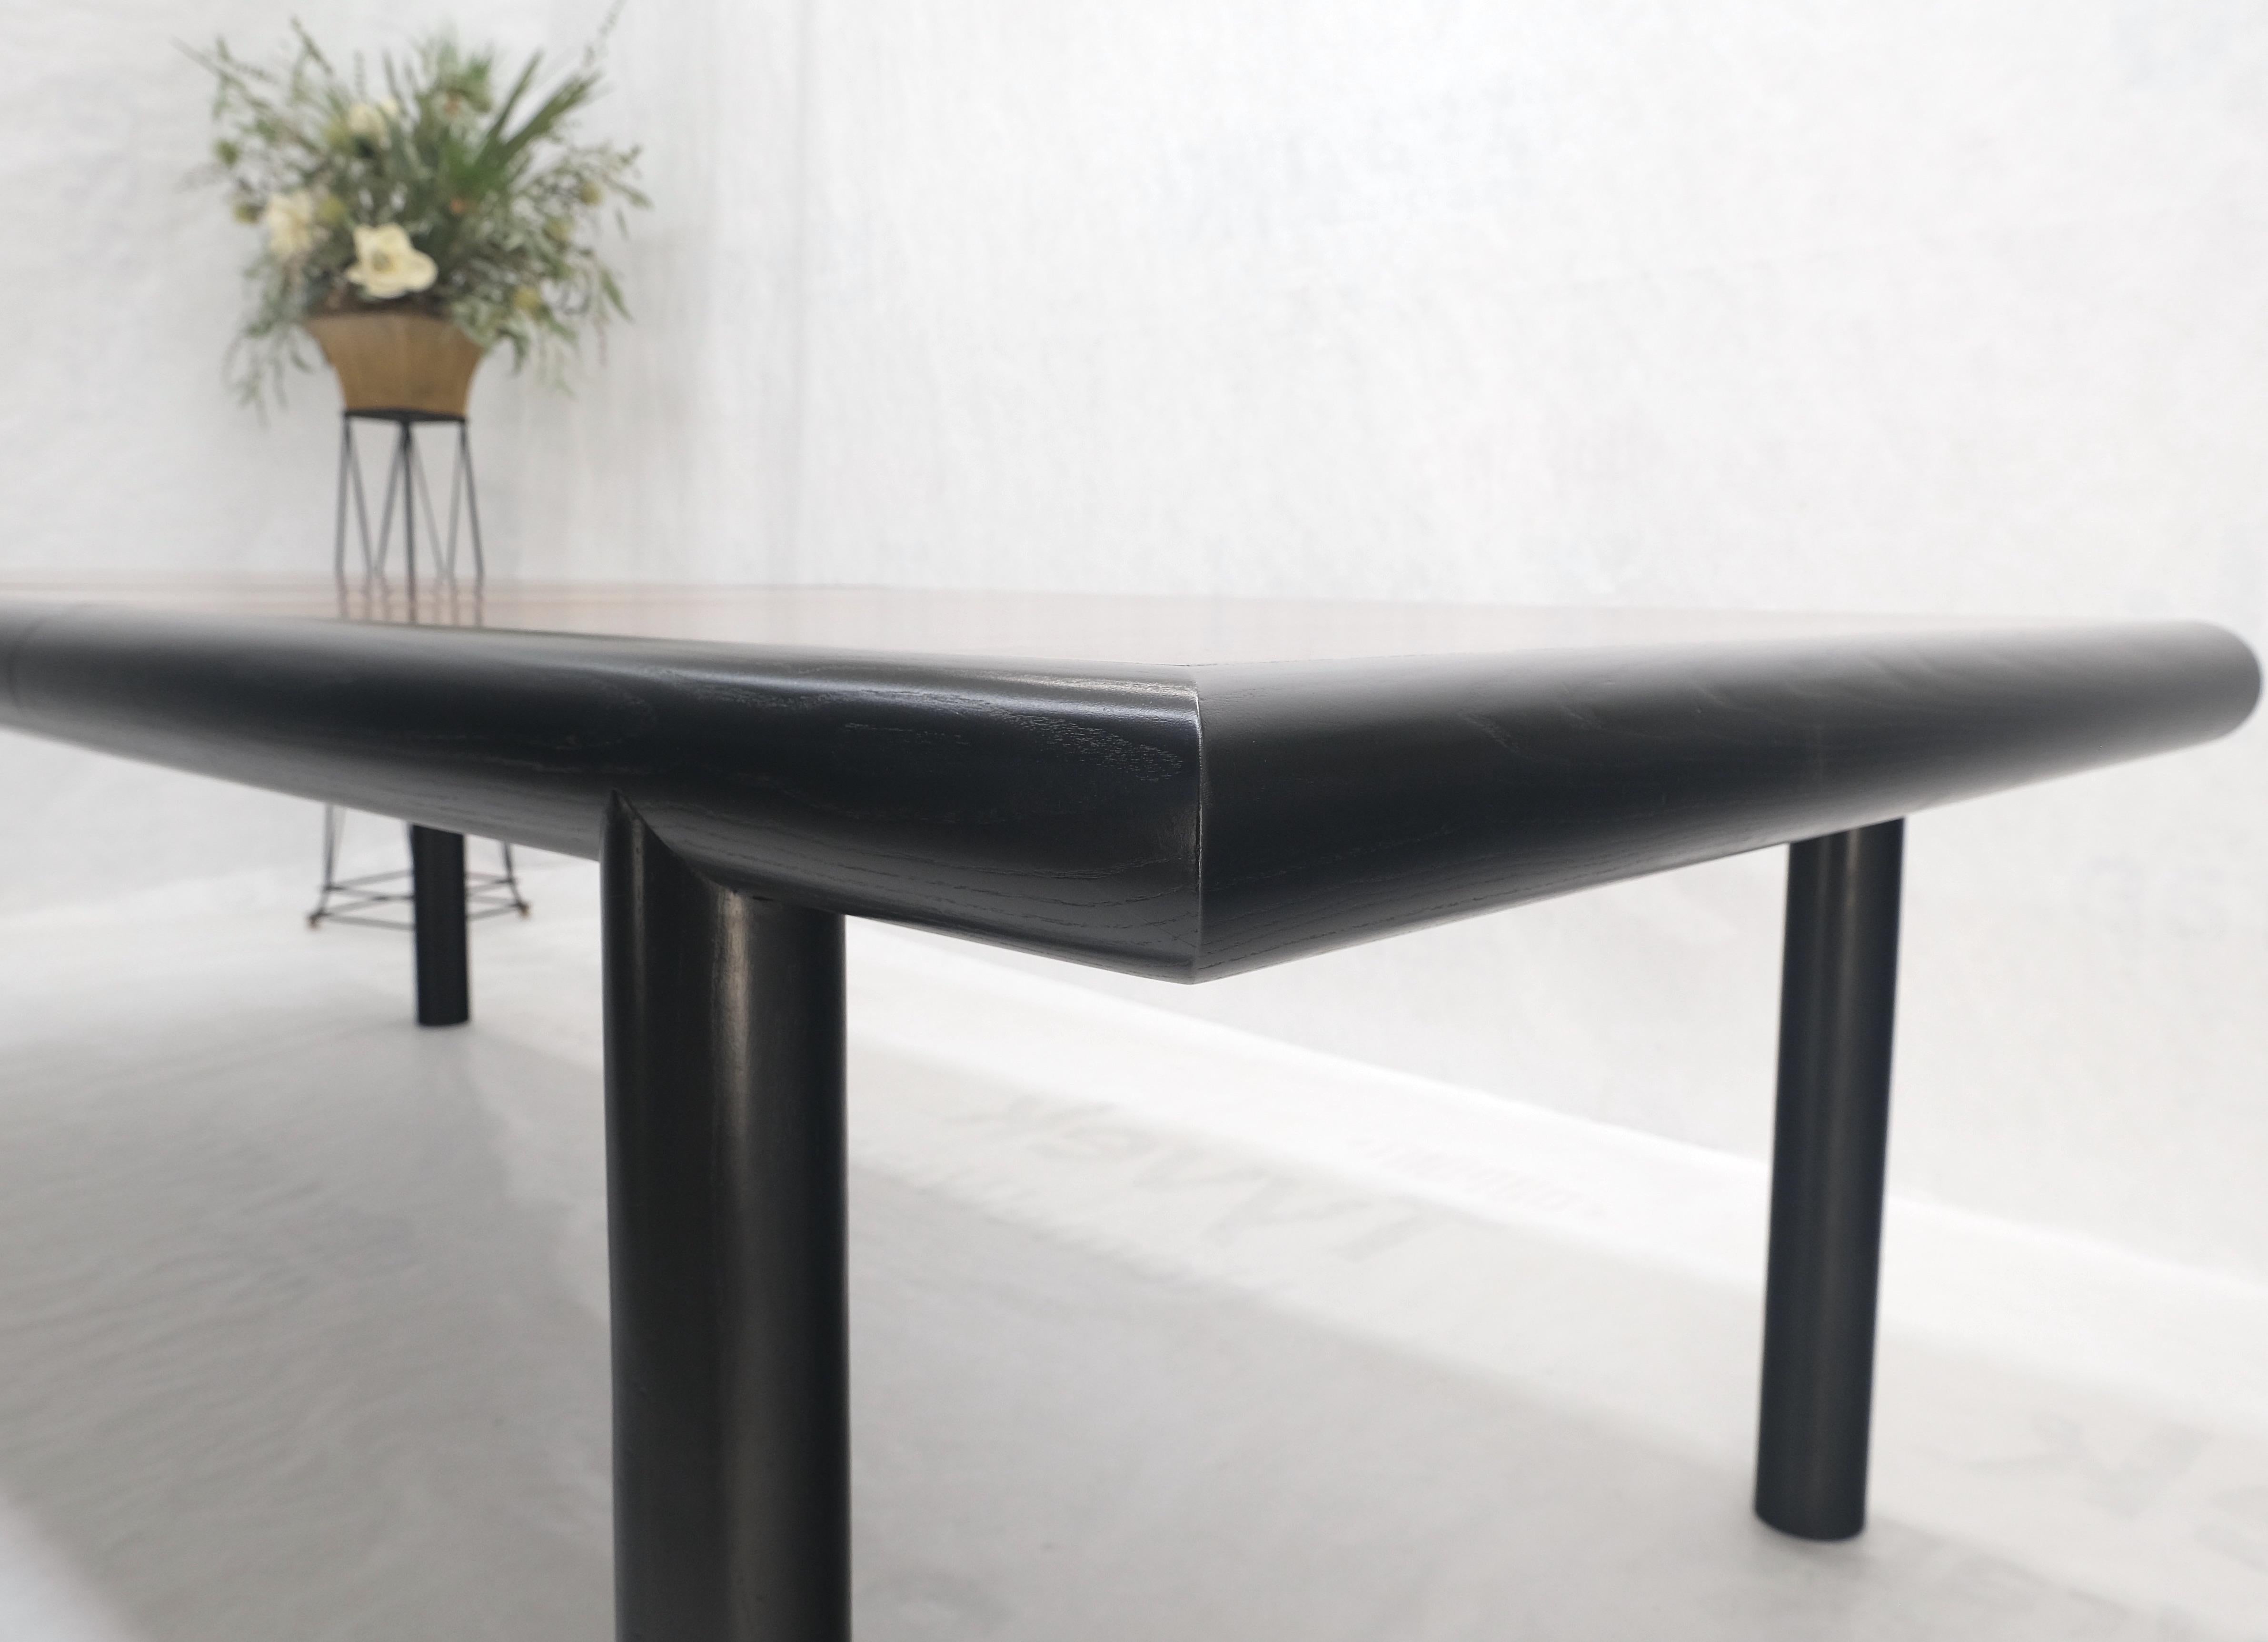 Rosewood Top Black Lacquer Base Massive Cylinder Shape Legs Dining Table MINT! For Sale 3